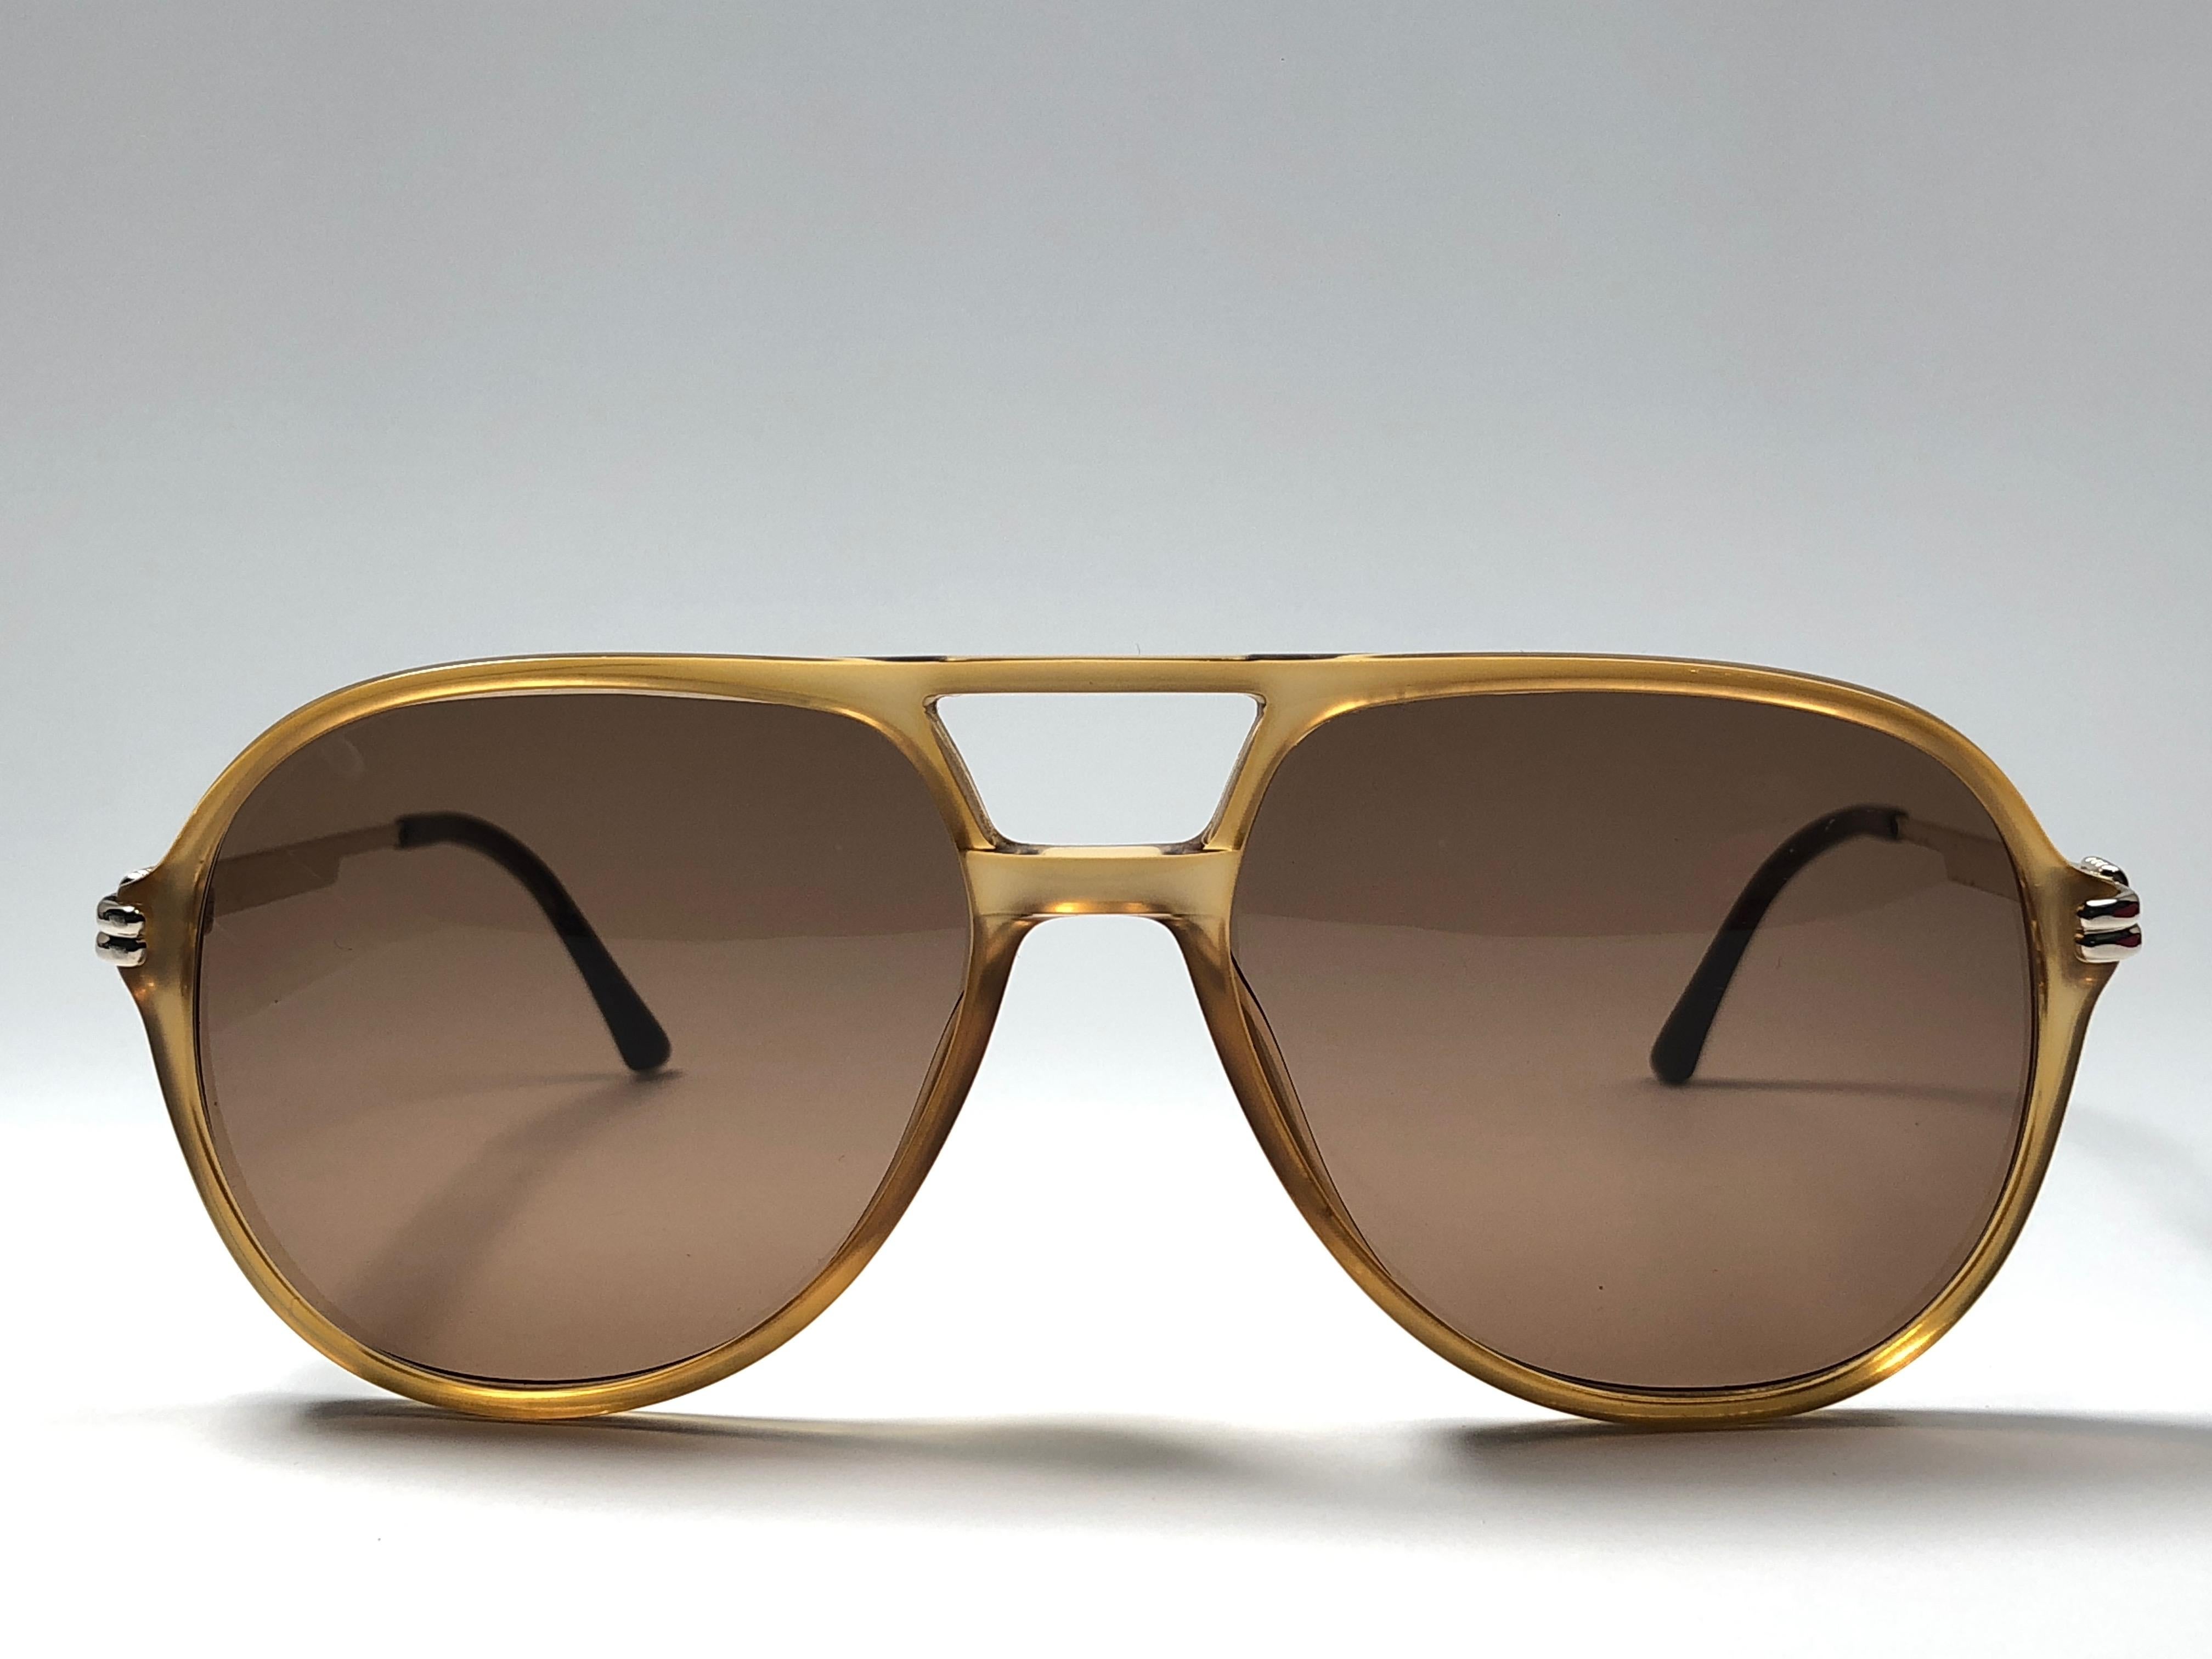 New vintage Christian Dior Monsieur amber translucent details frame.

Spotless brown medium lenses.

Comes with it original CD Monsieur sleeve.

New, never worn or displayed this item may show light sign of wear due to storage.

Made in Austria